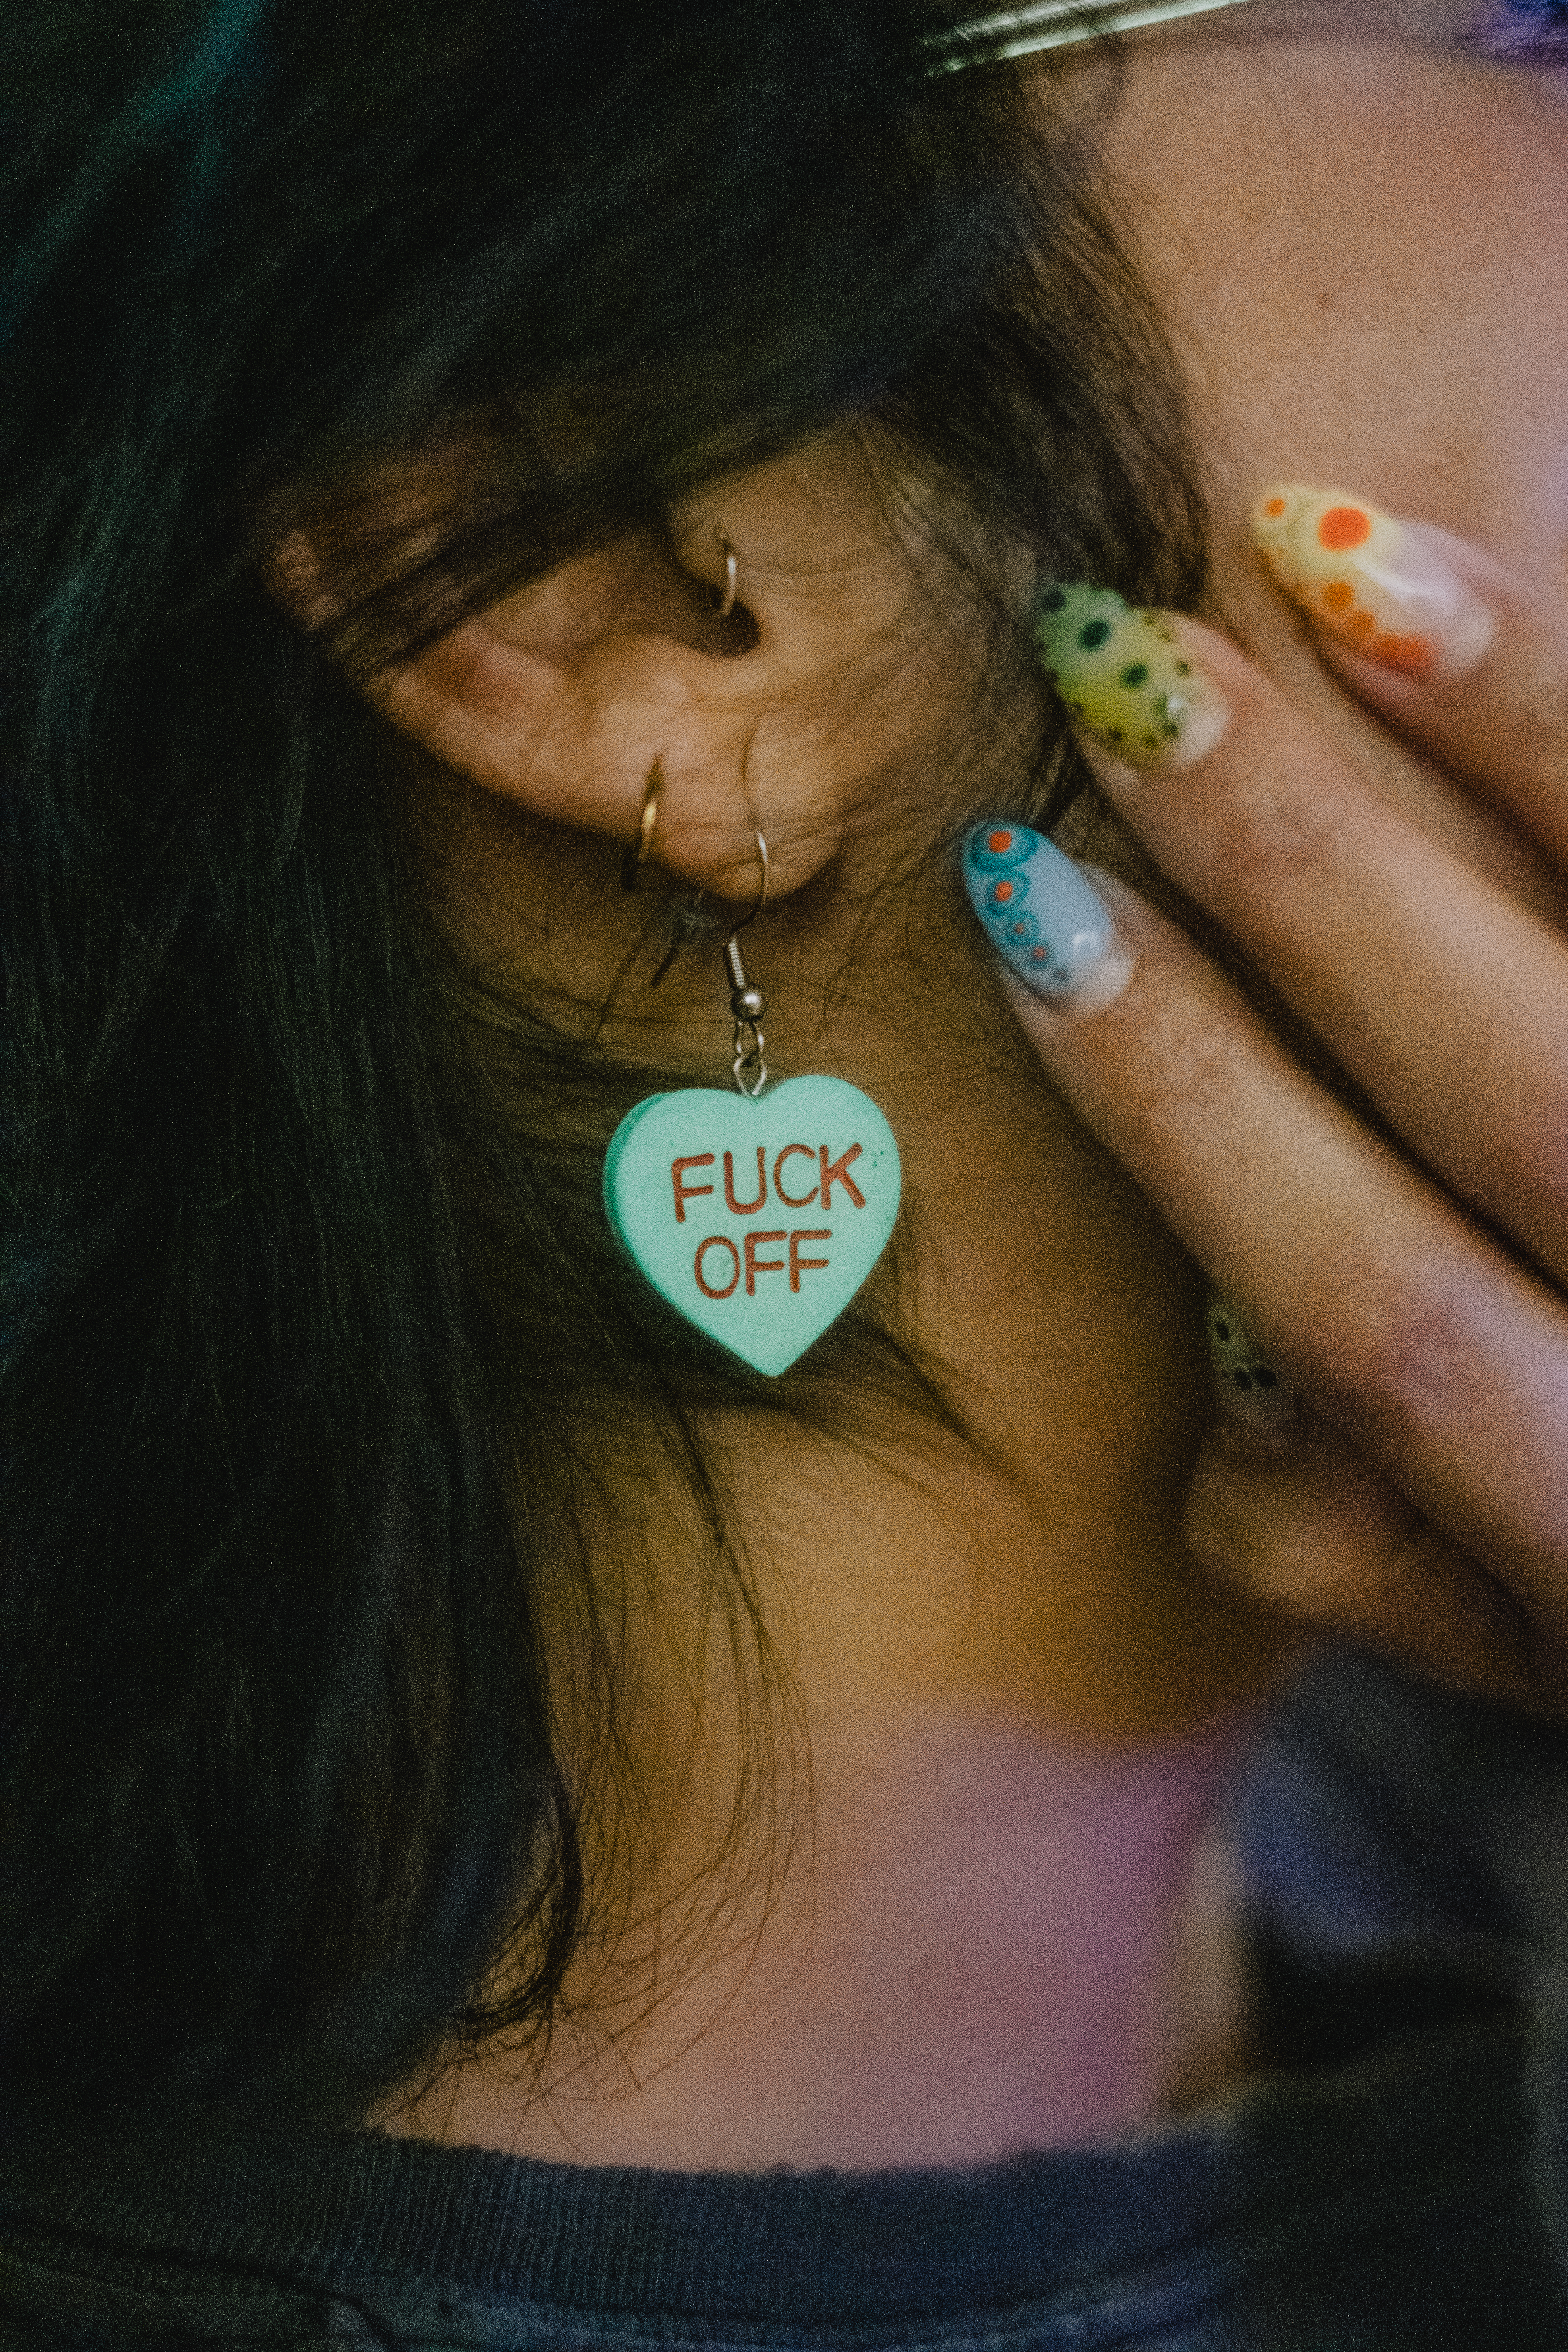 Kayla de Leon with a sick manicure and an earring that says fuck off